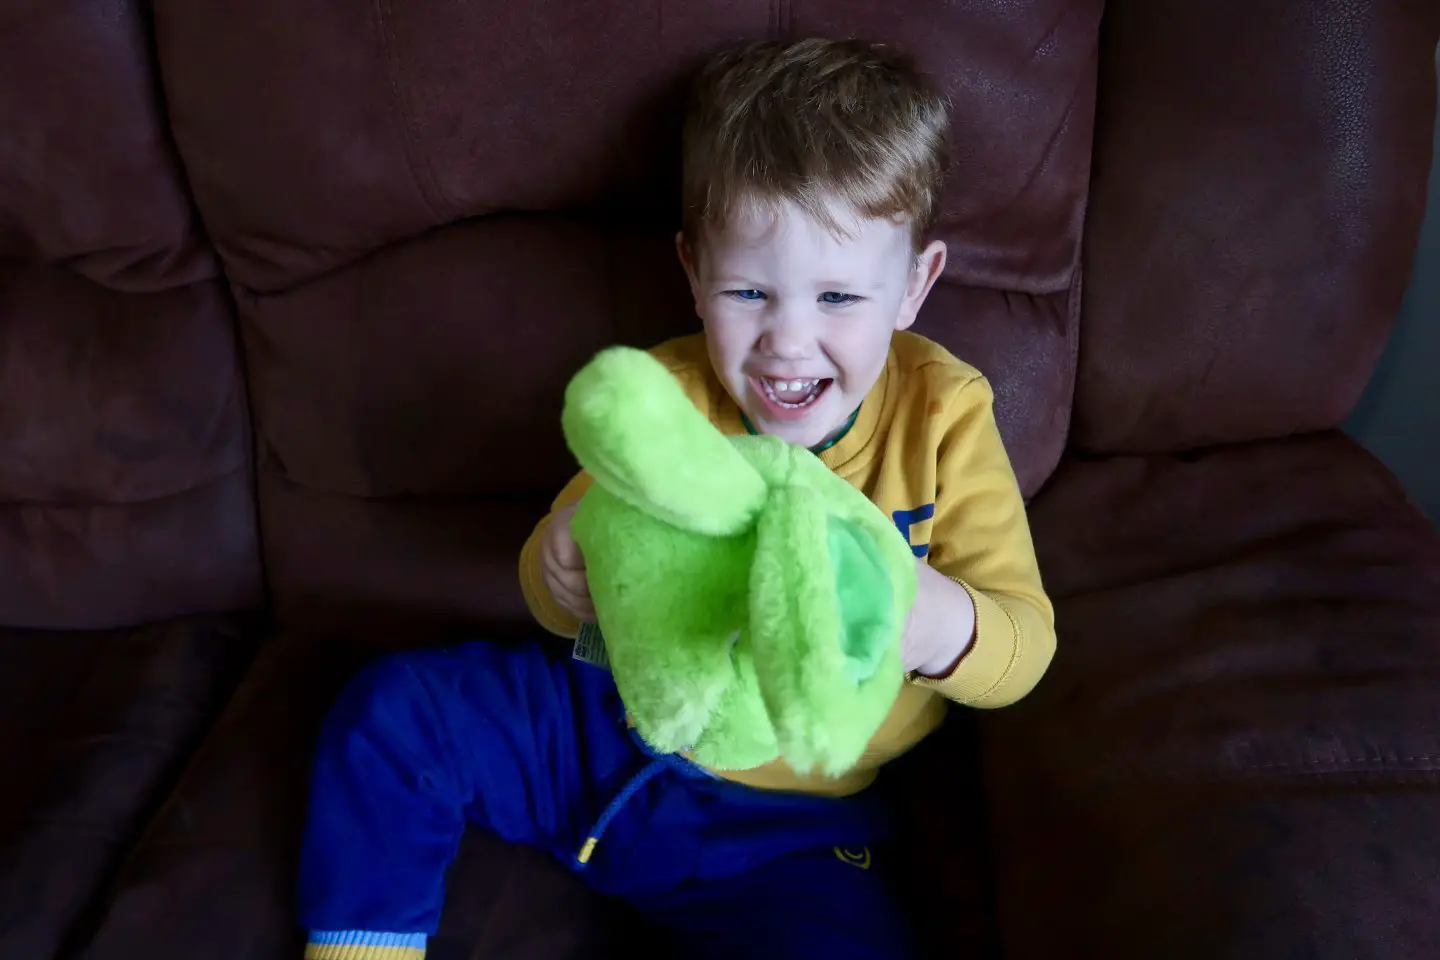 A toddler laughing at a green fluffy toy in his hands